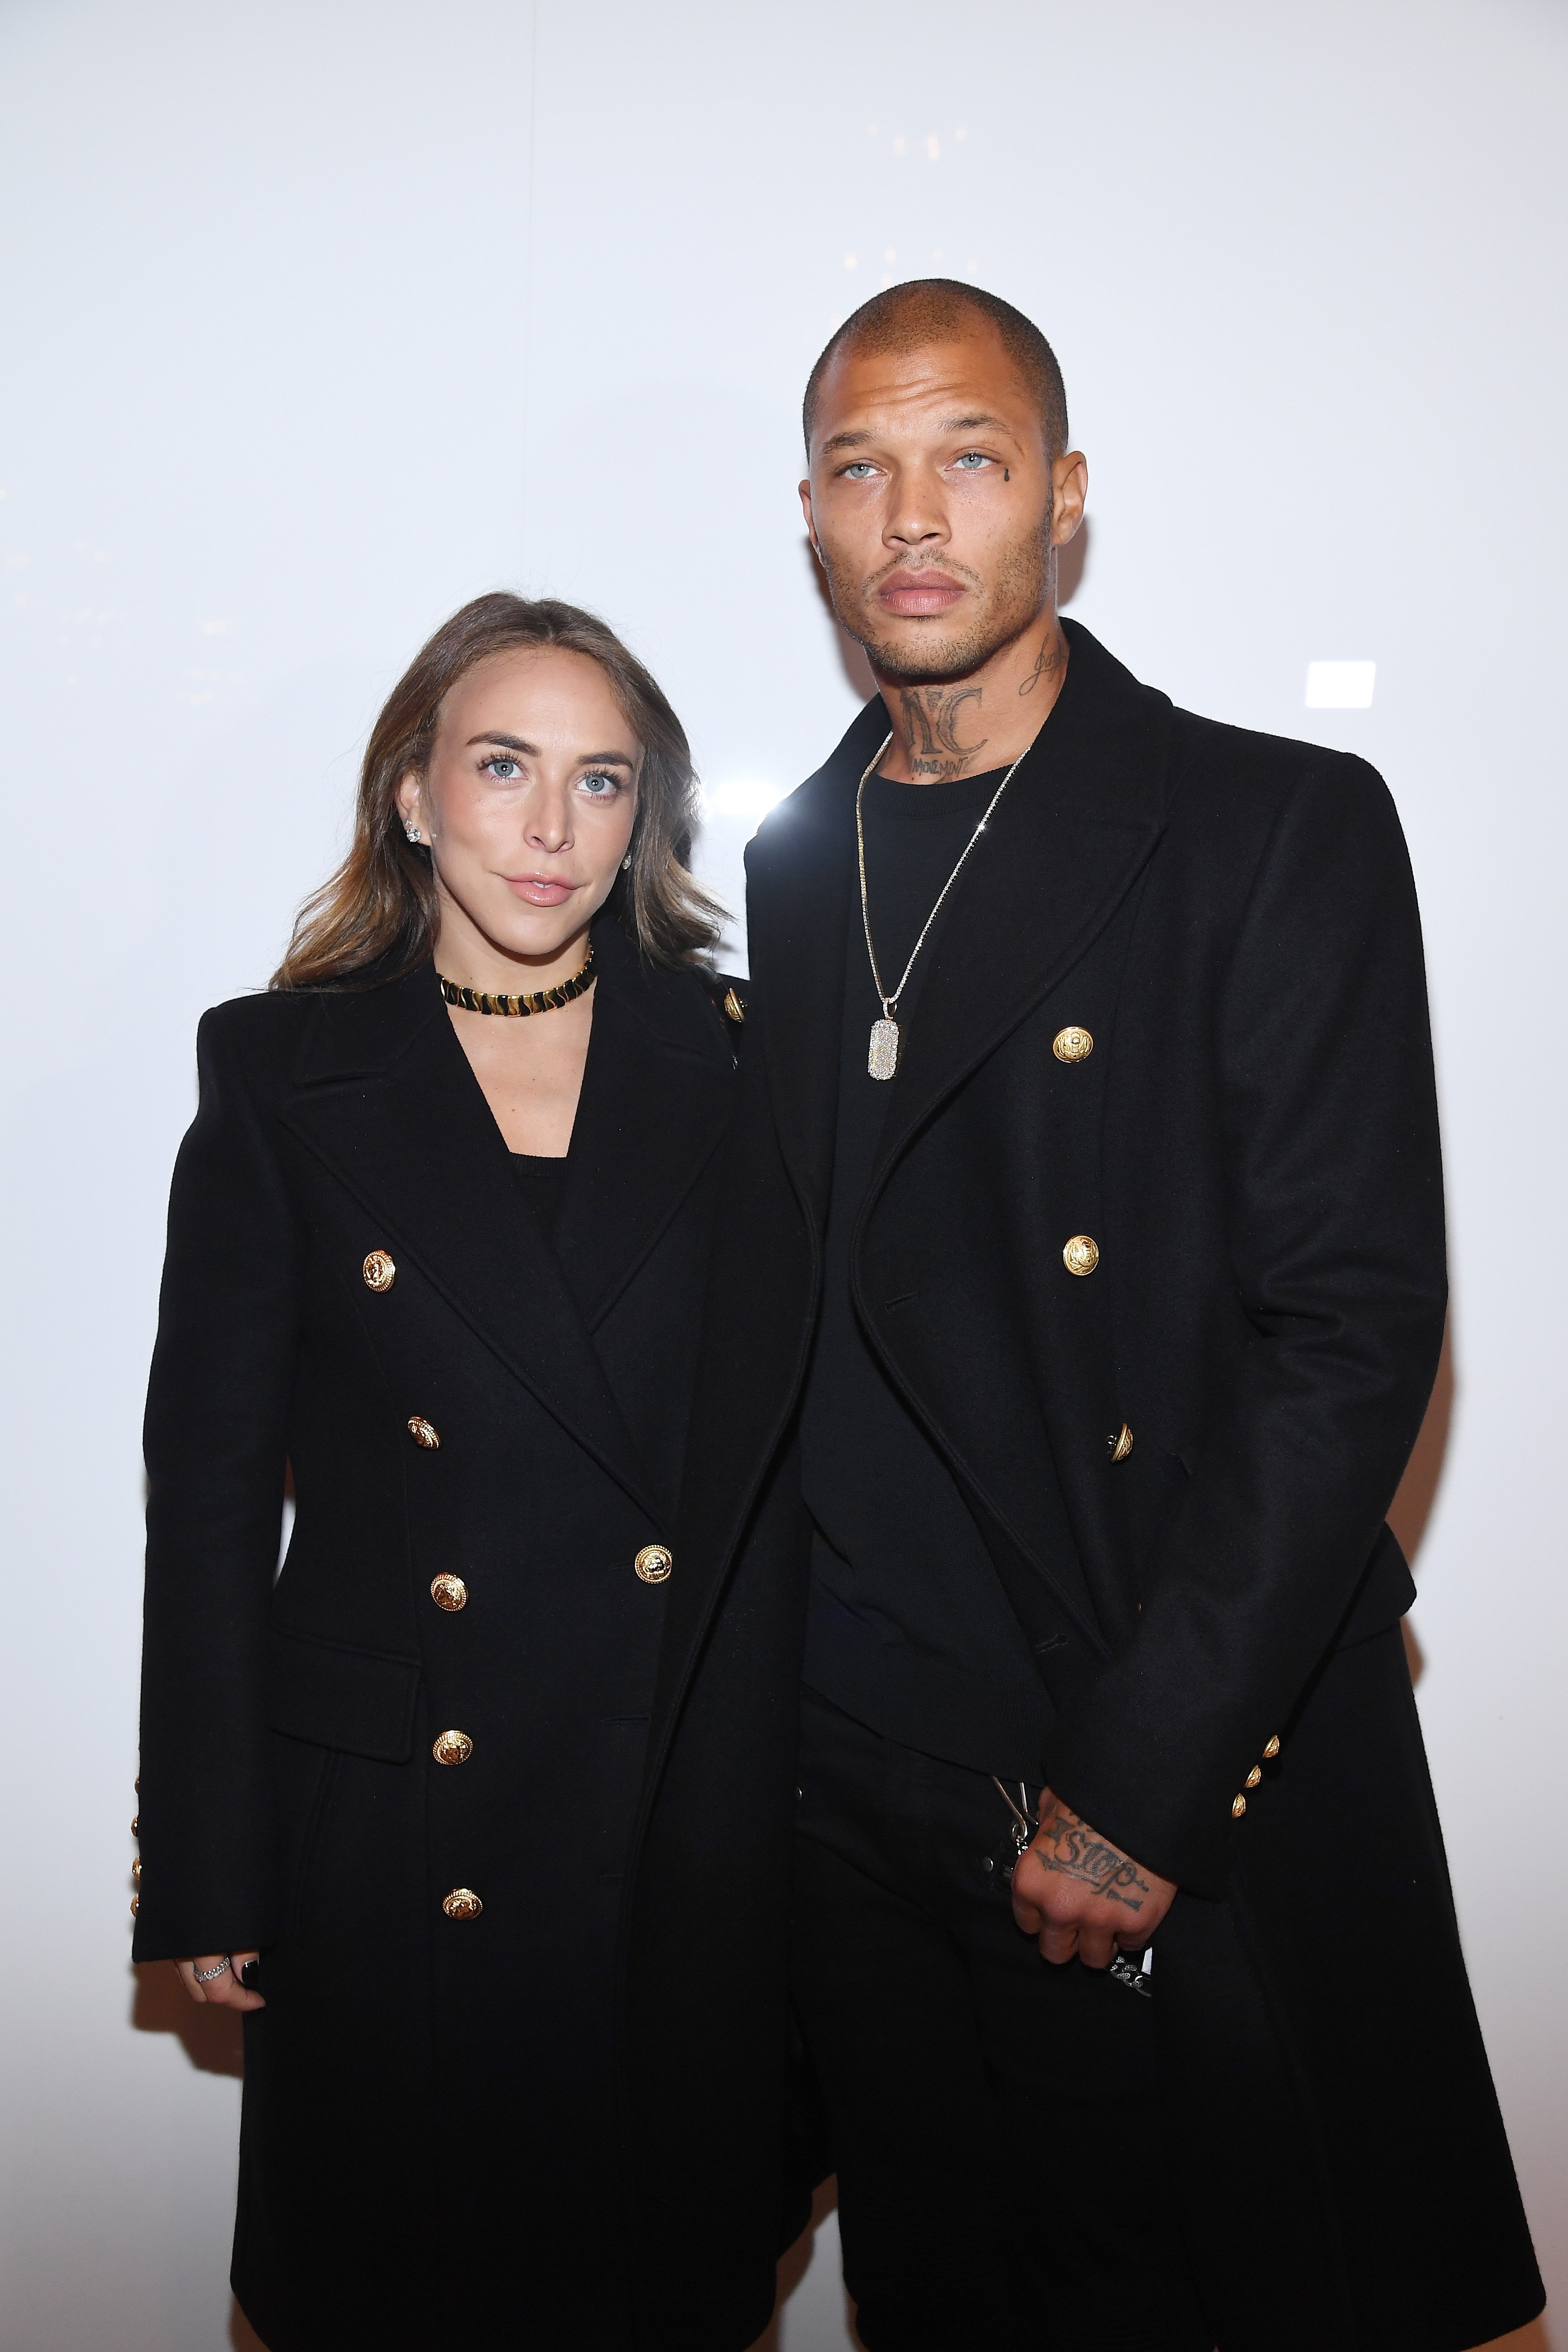 Chloe Green and Jeremy Meeks at the Paris Fashion Week on January 20, 2018 in Paris, France | Photo: Getty Images